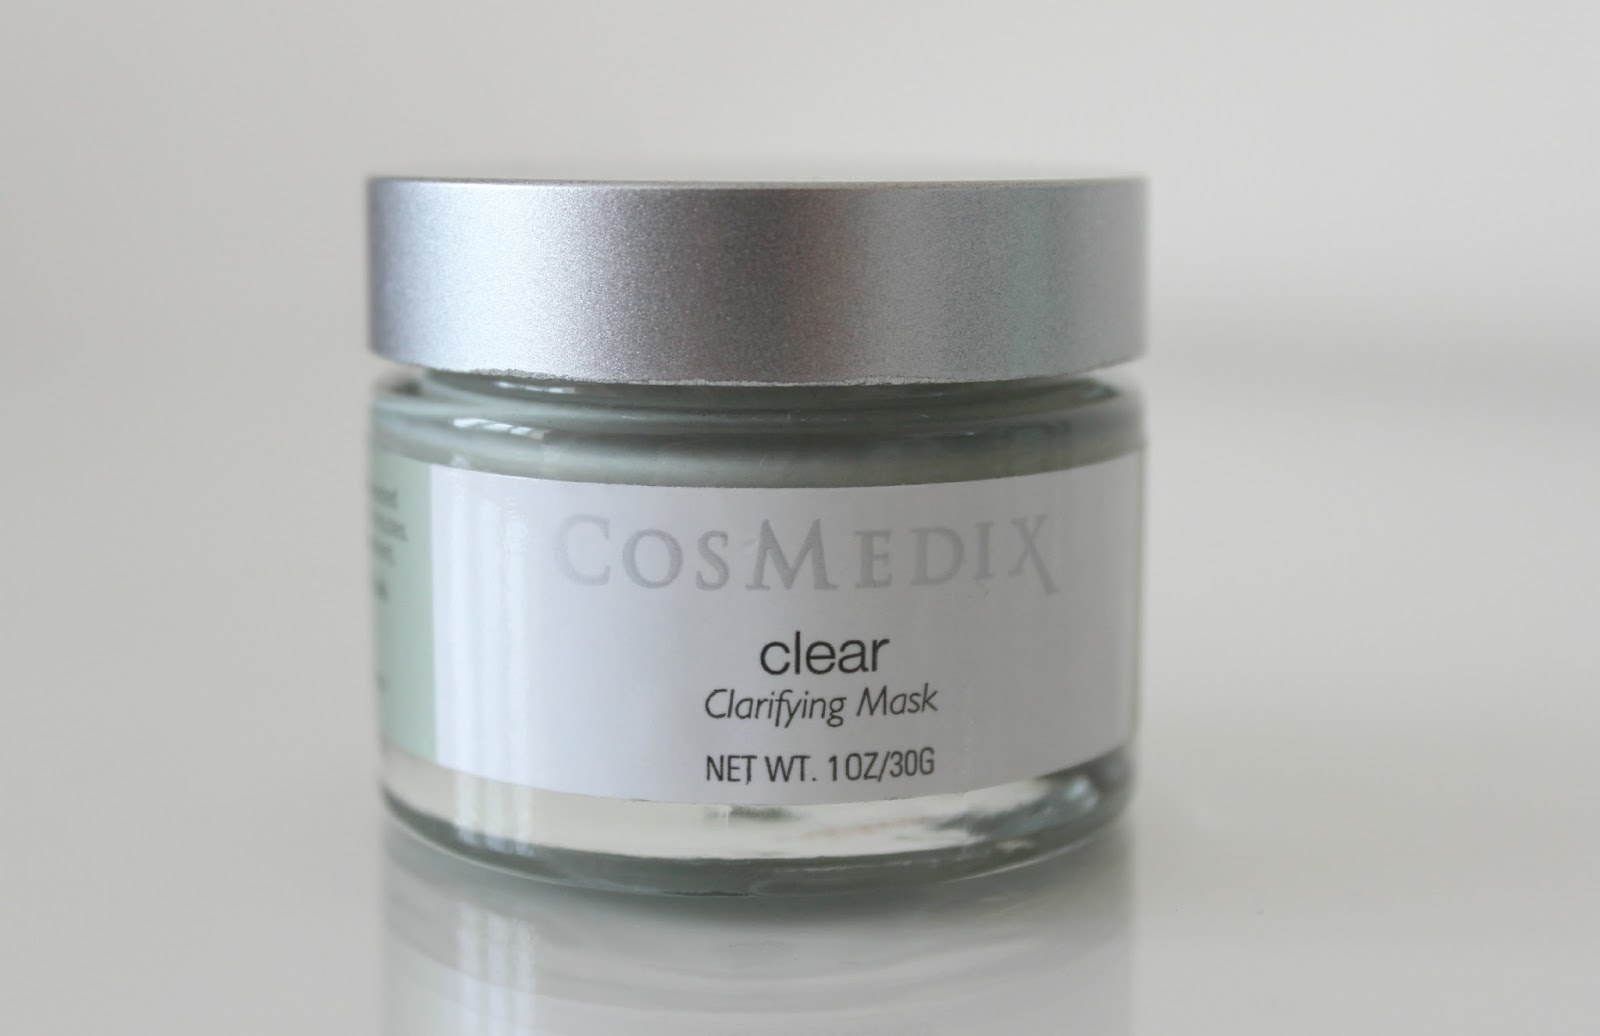 A picture of the CosMedix Clear Clarifying Mask